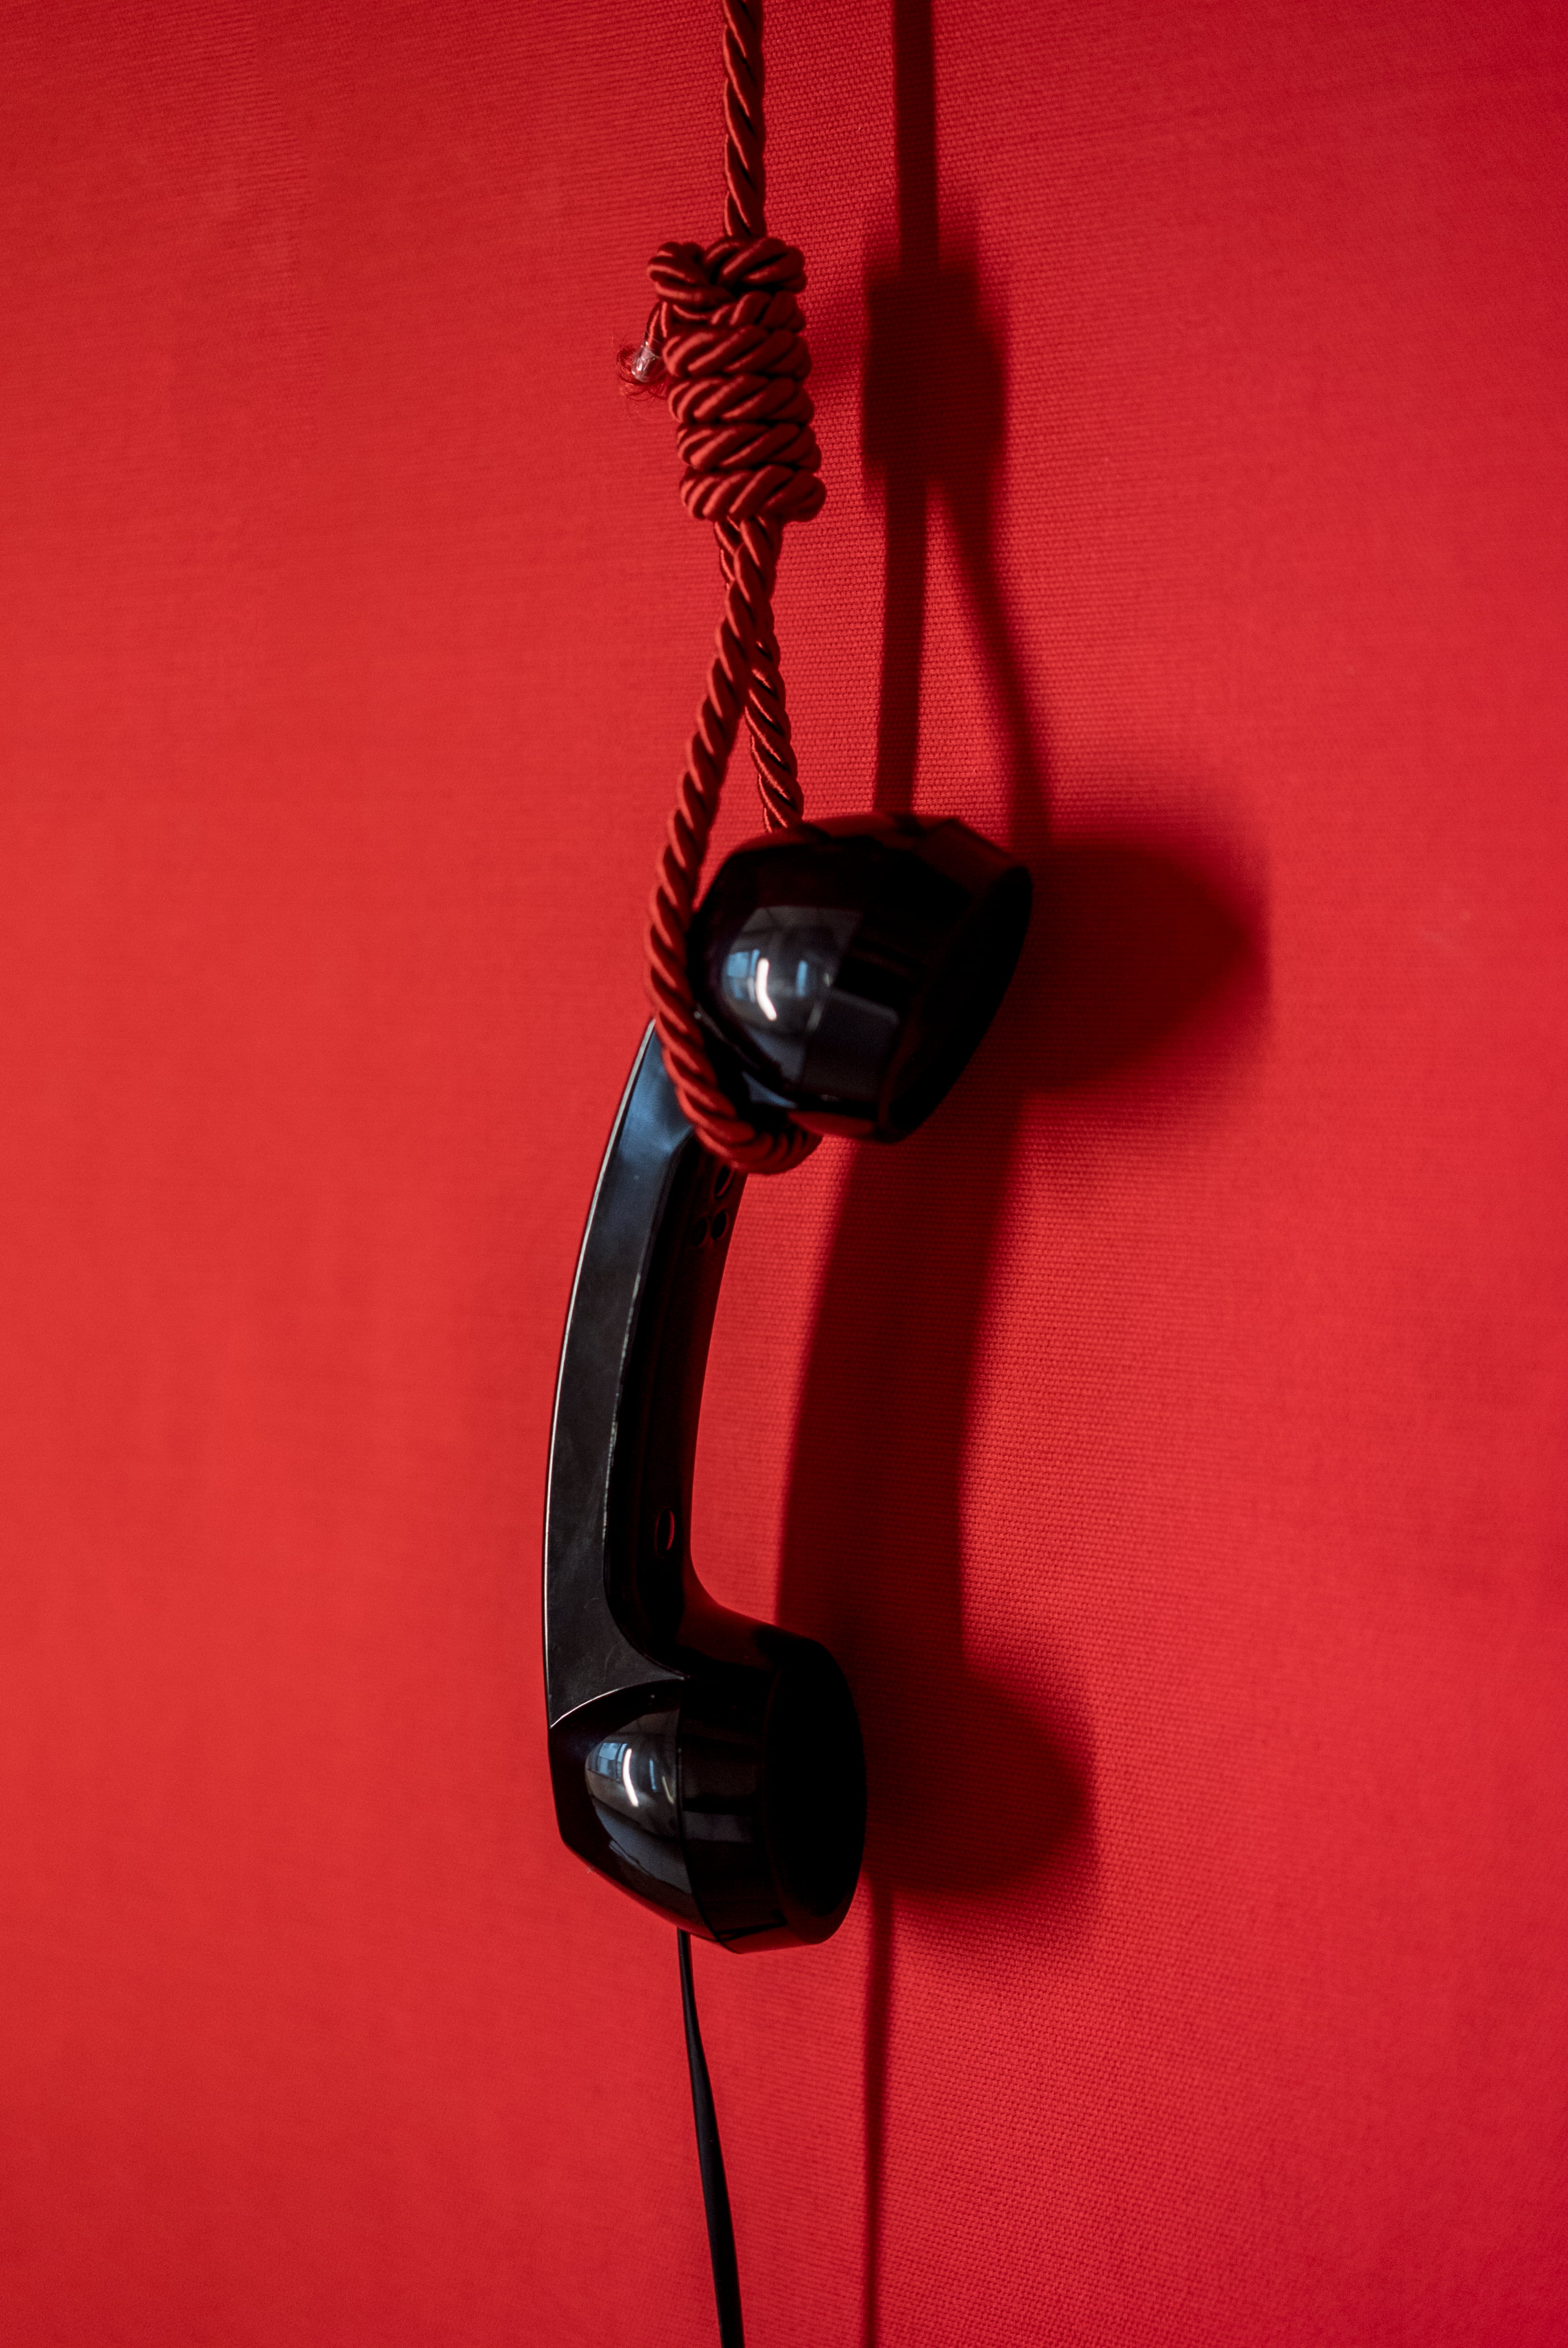 black suicide telephone, pay phone, noose, technology, hanging